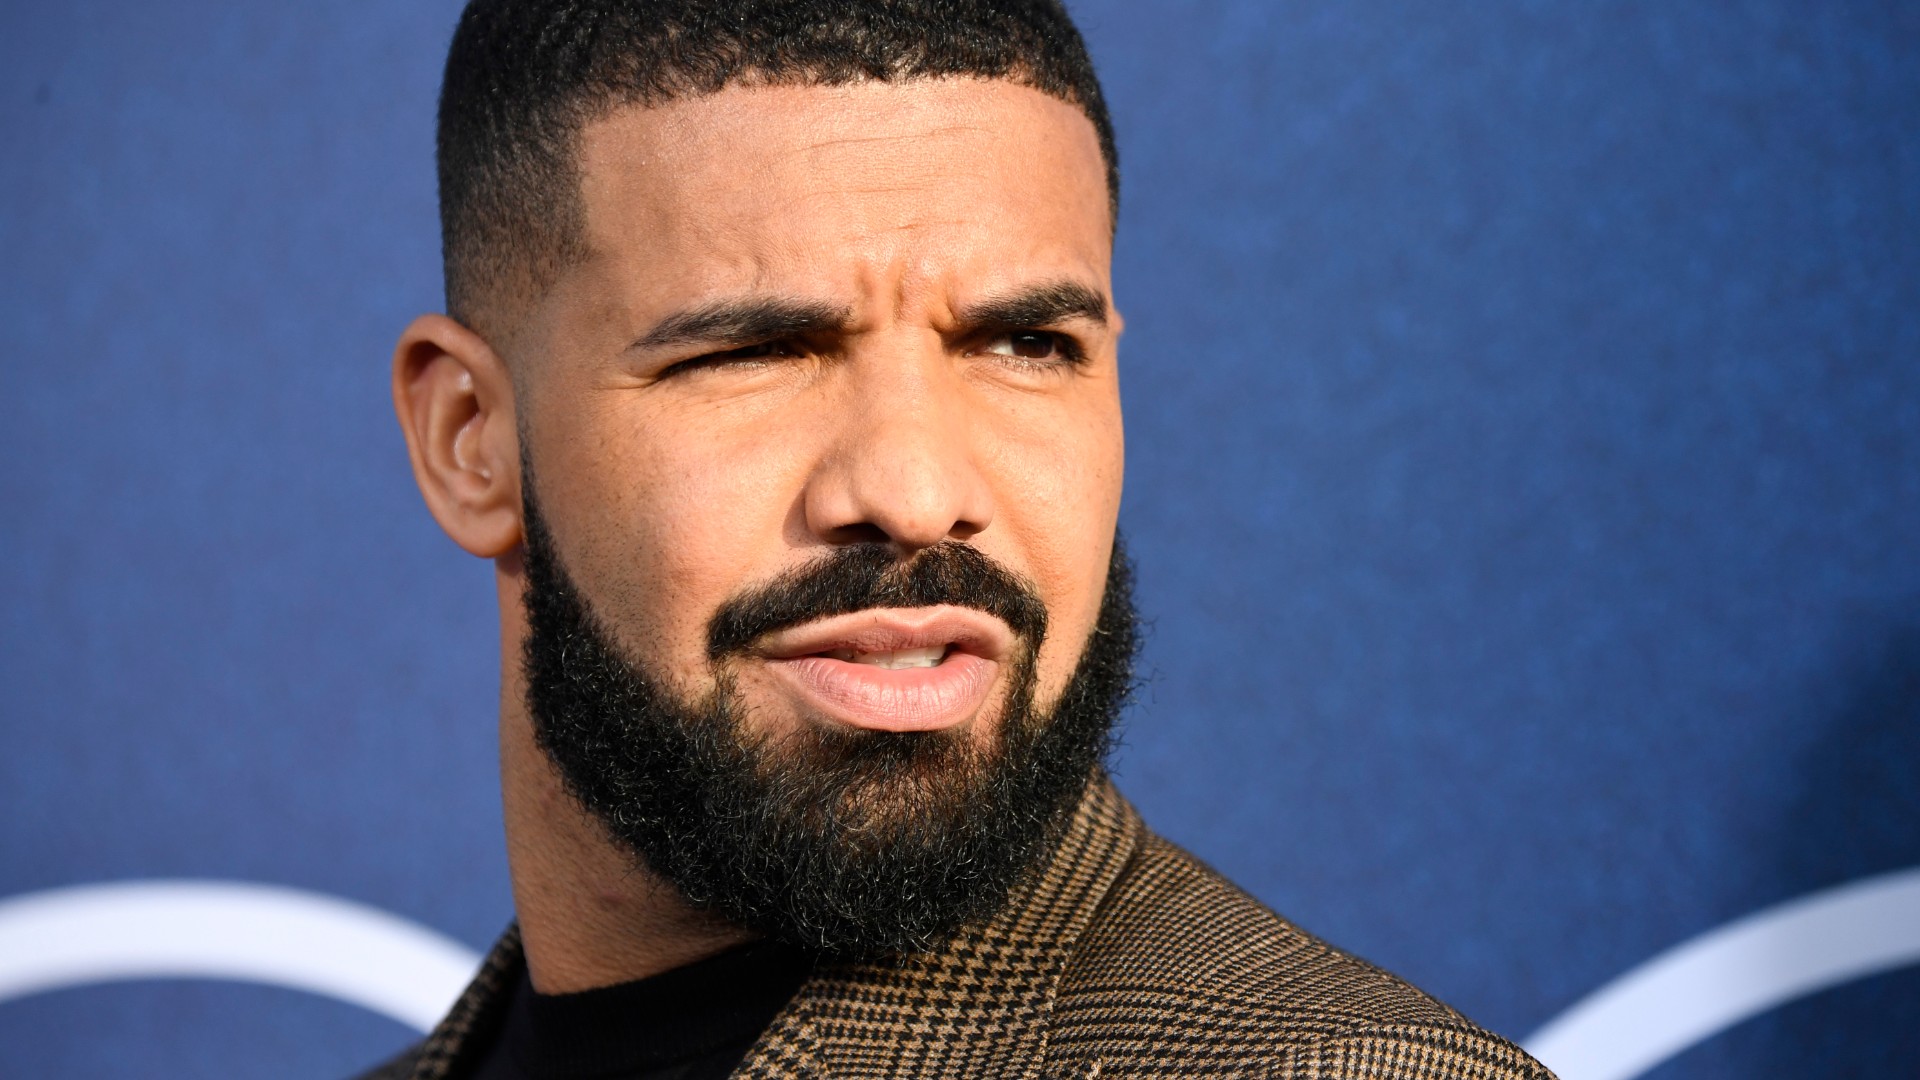 Drake faces backlash for dissing Moroccan women pic